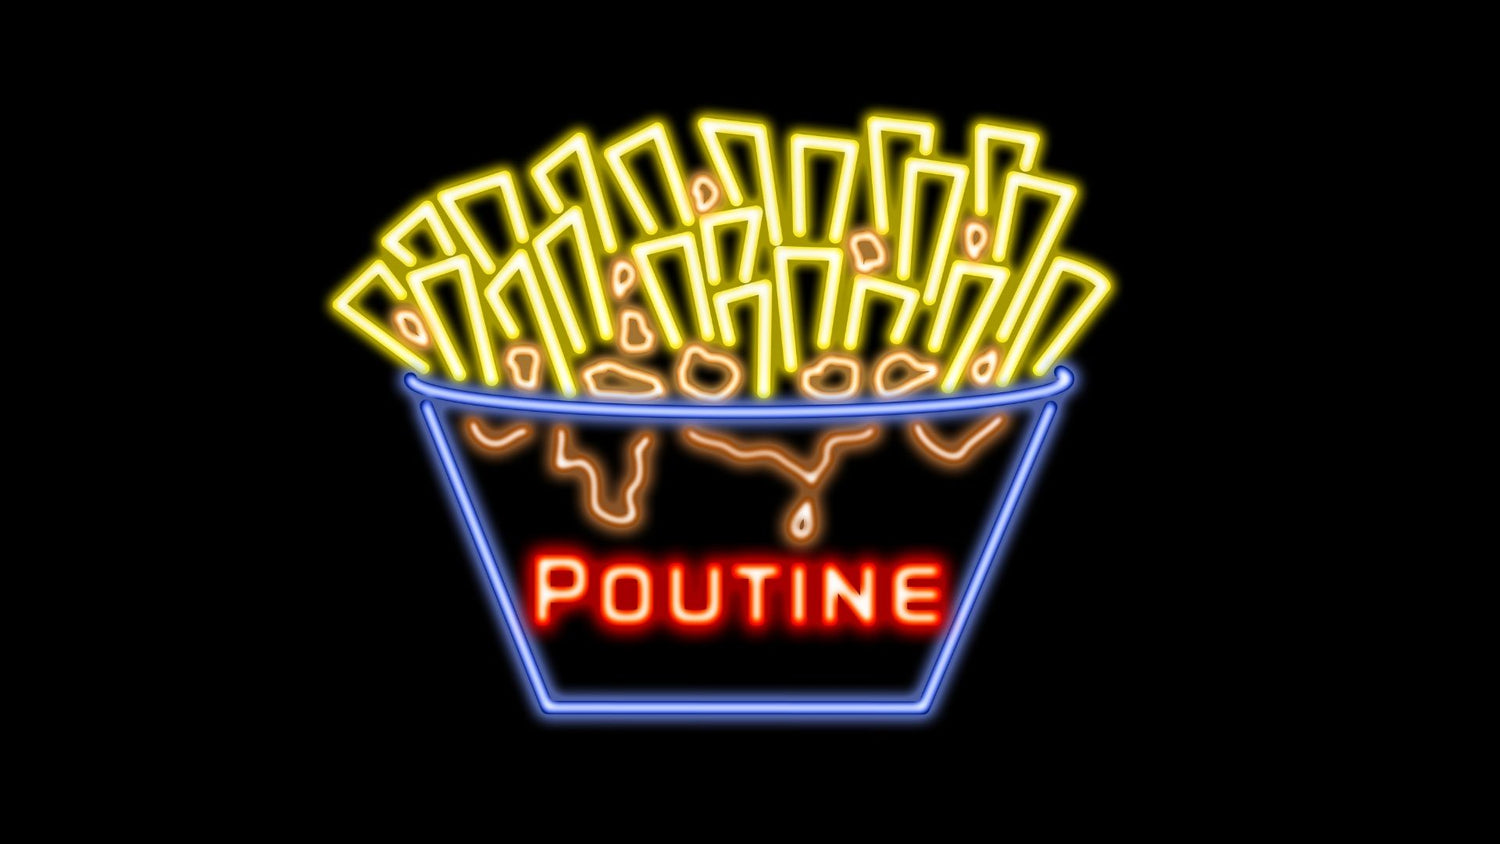 HUNGER'S POUTINE SPECIAL